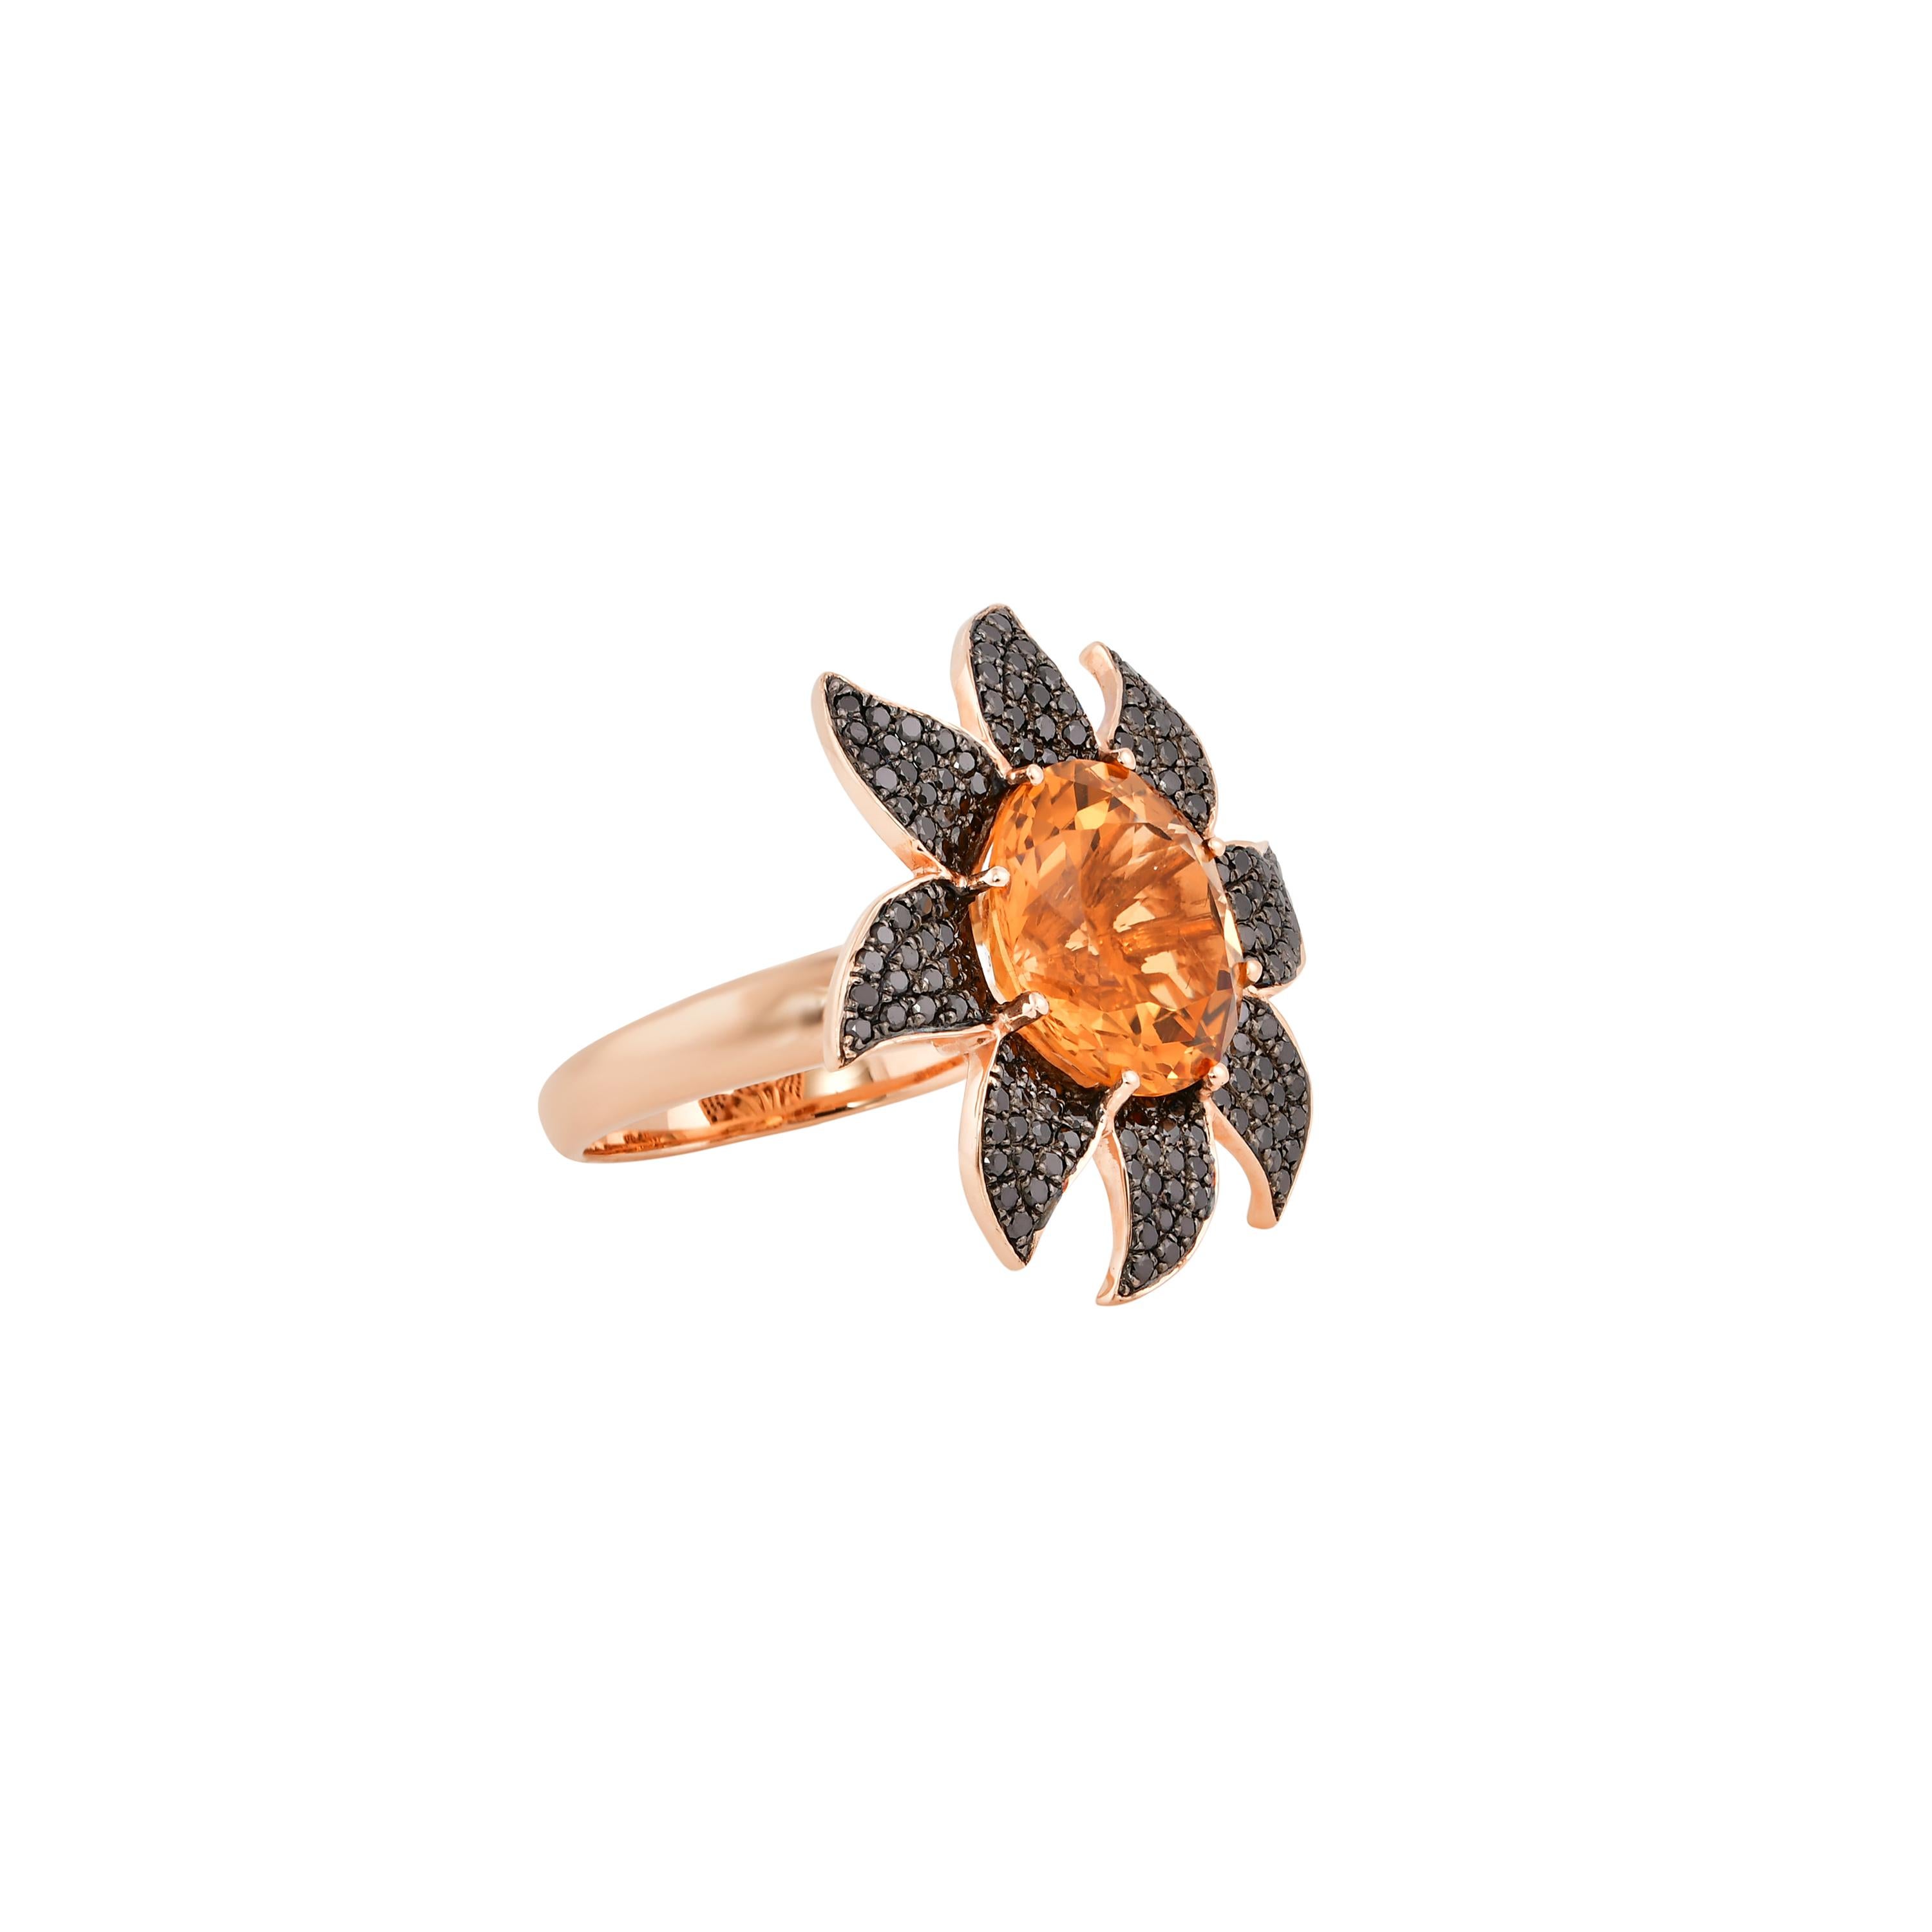 Contemporary 5 Carat Citrine and Black Diamond Ring in 14 Karat Rose Gold For Sale